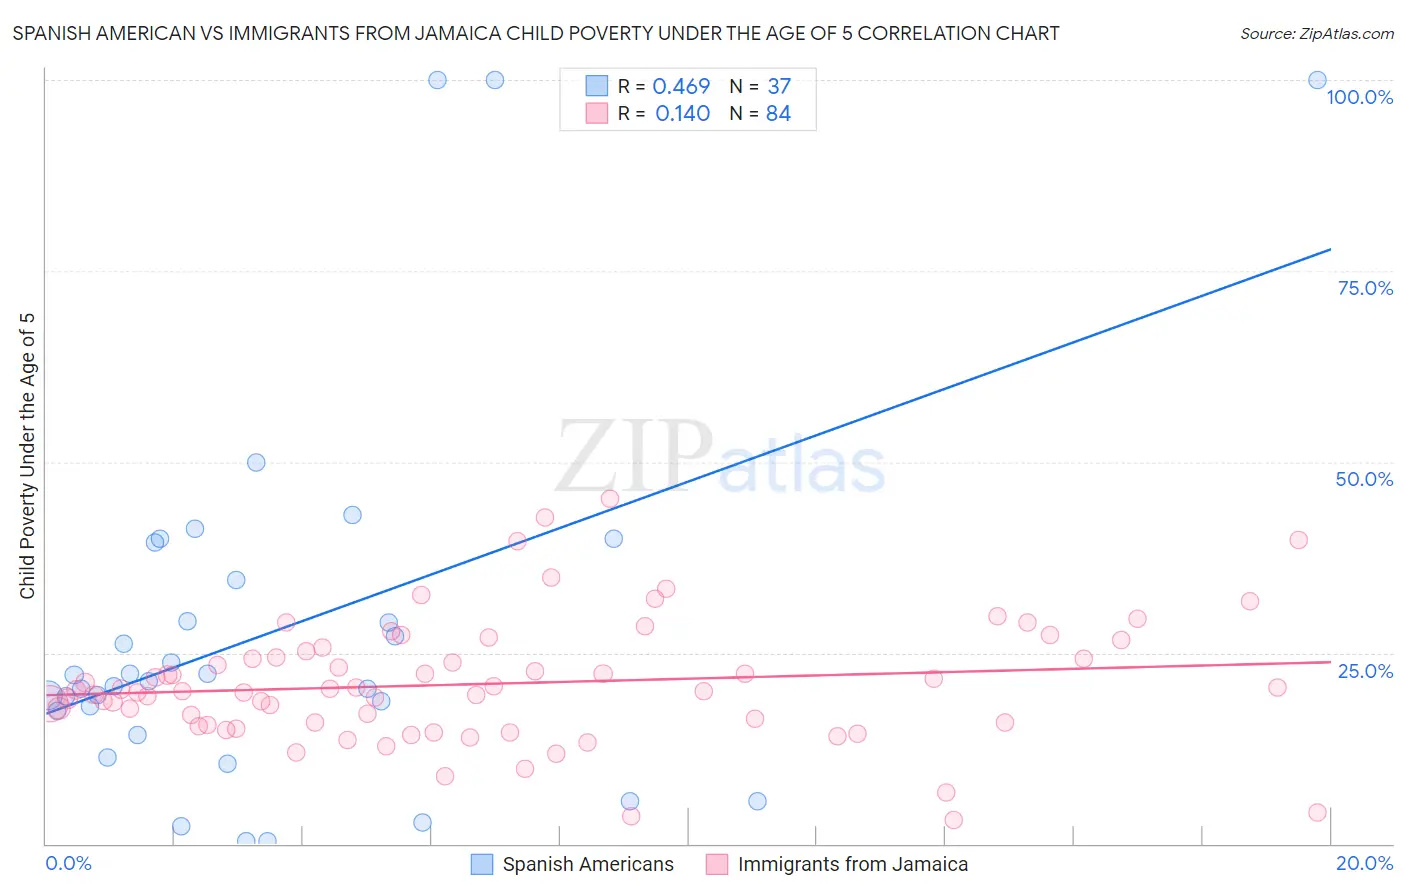 Spanish American vs Immigrants from Jamaica Child Poverty Under the Age of 5